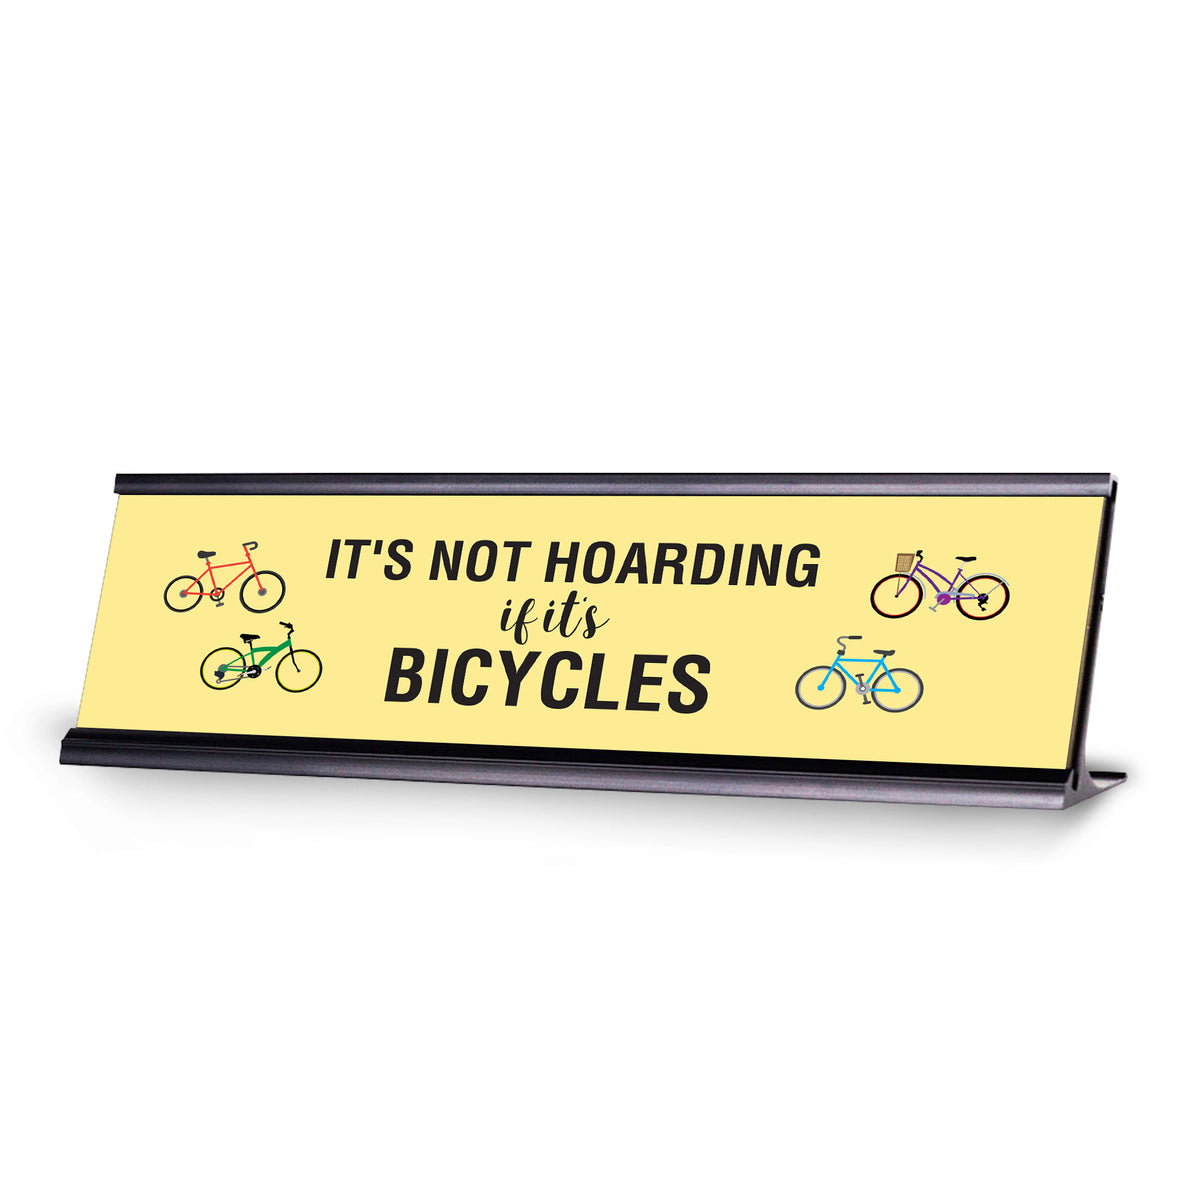 It's Not Hoarding if it's Bicycles, Yellow, Novelty Desk Sign 2 x 8"